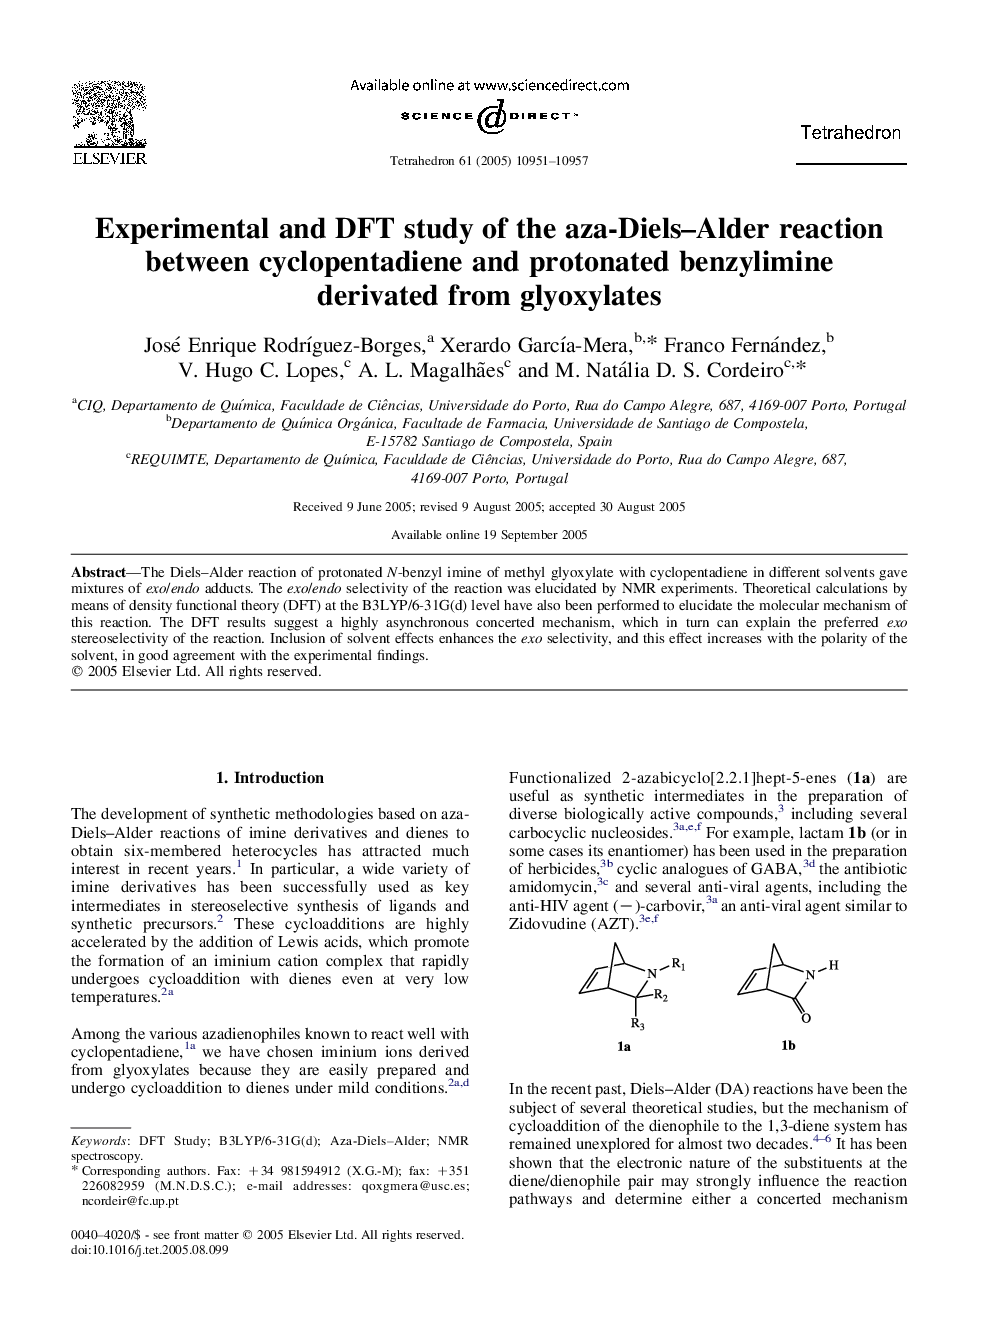 Experimental and DFT study of the aza-Diels-Alder reaction between cyclopentadiene and protonated benzylimine derivated from glyoxylates